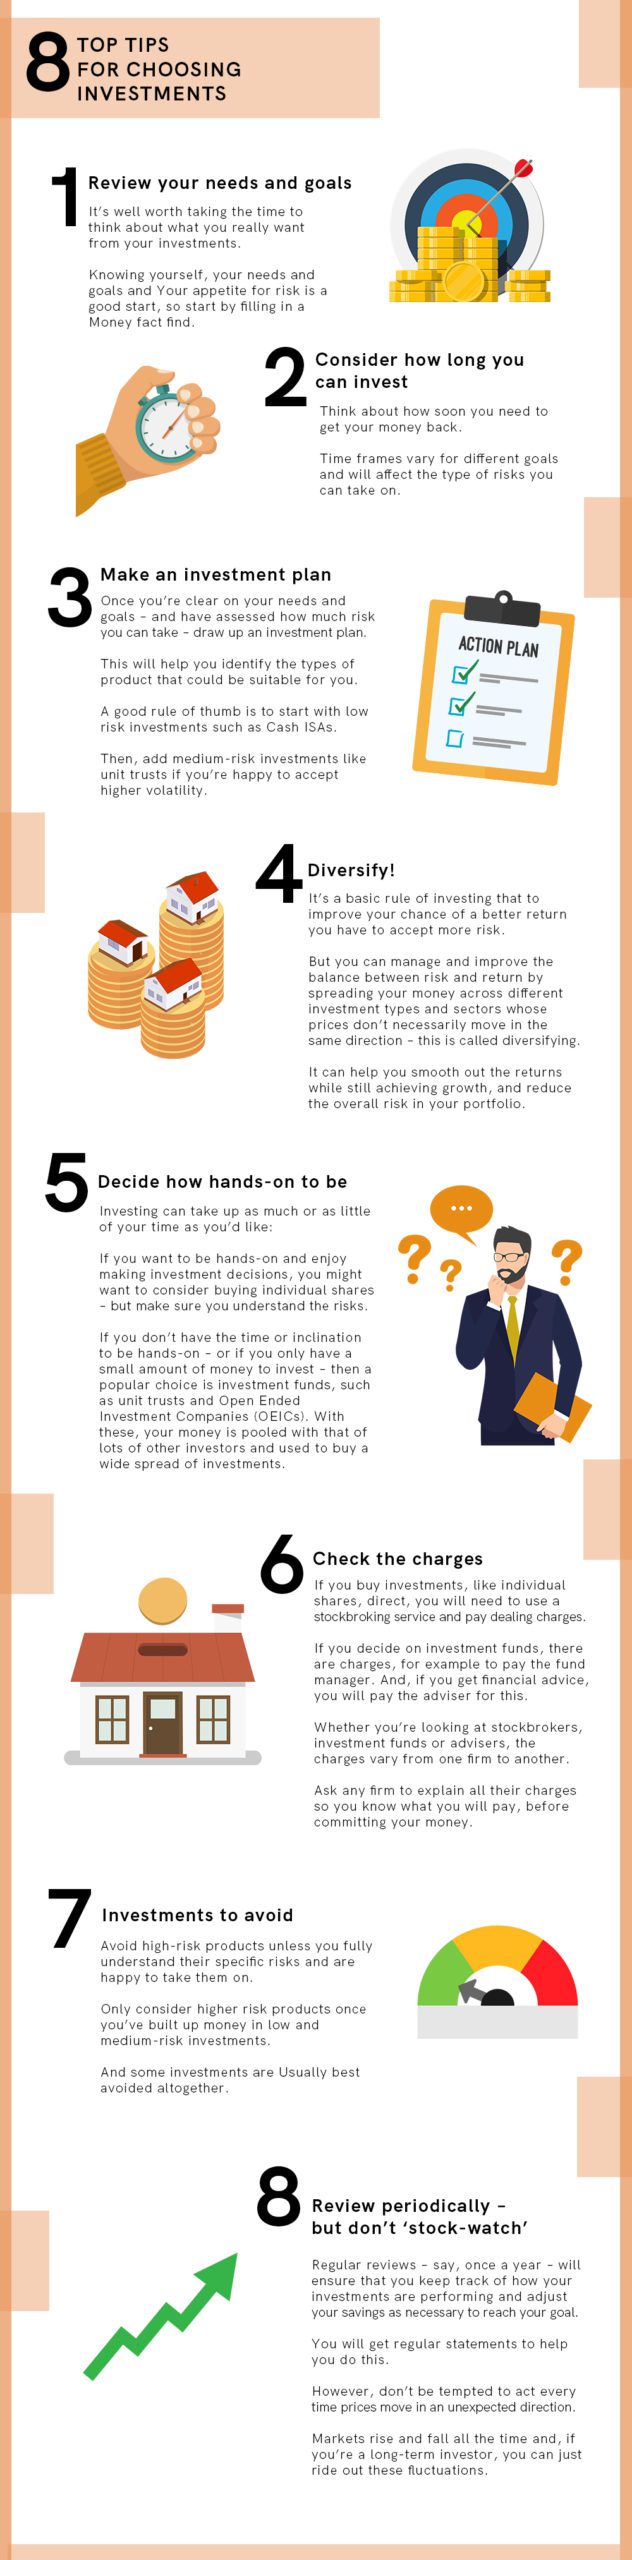 8 Top Tips for Choosing Investments infographic